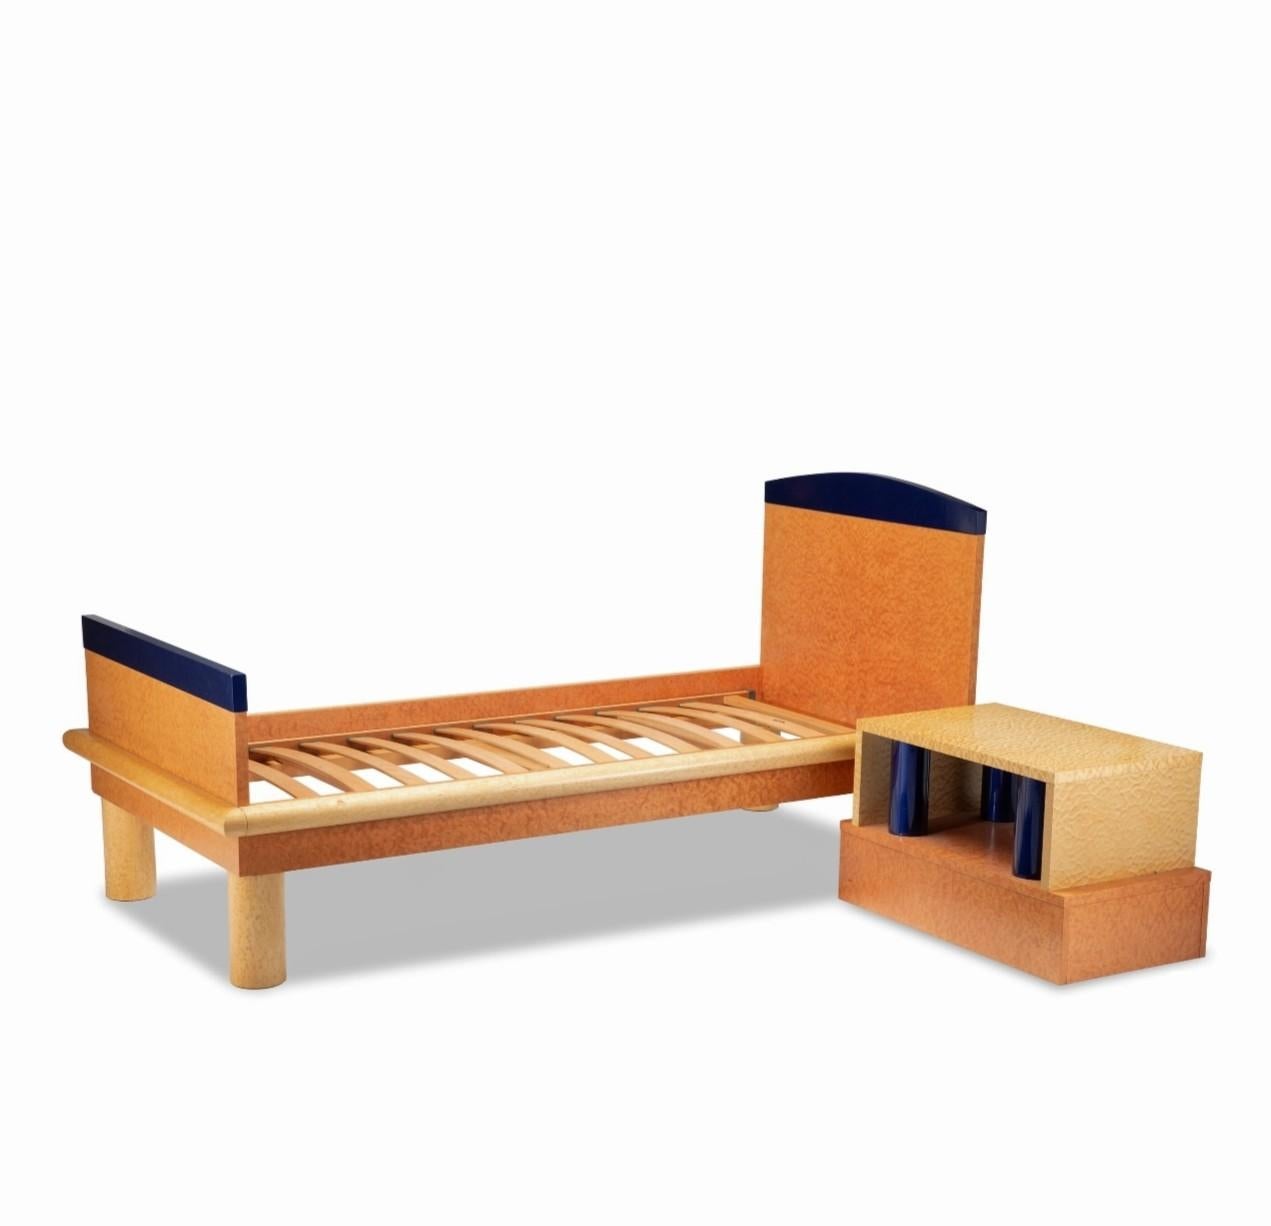 A rare and iconic Italian post-modern Donau Collection bed and matching nightstand designed by master architect and furniture designer Ettore Sottsass (Austria/Italy, 1917-2007) in collaboration with Marco Zanini (Milan, Italy; b.1971) for Leitner